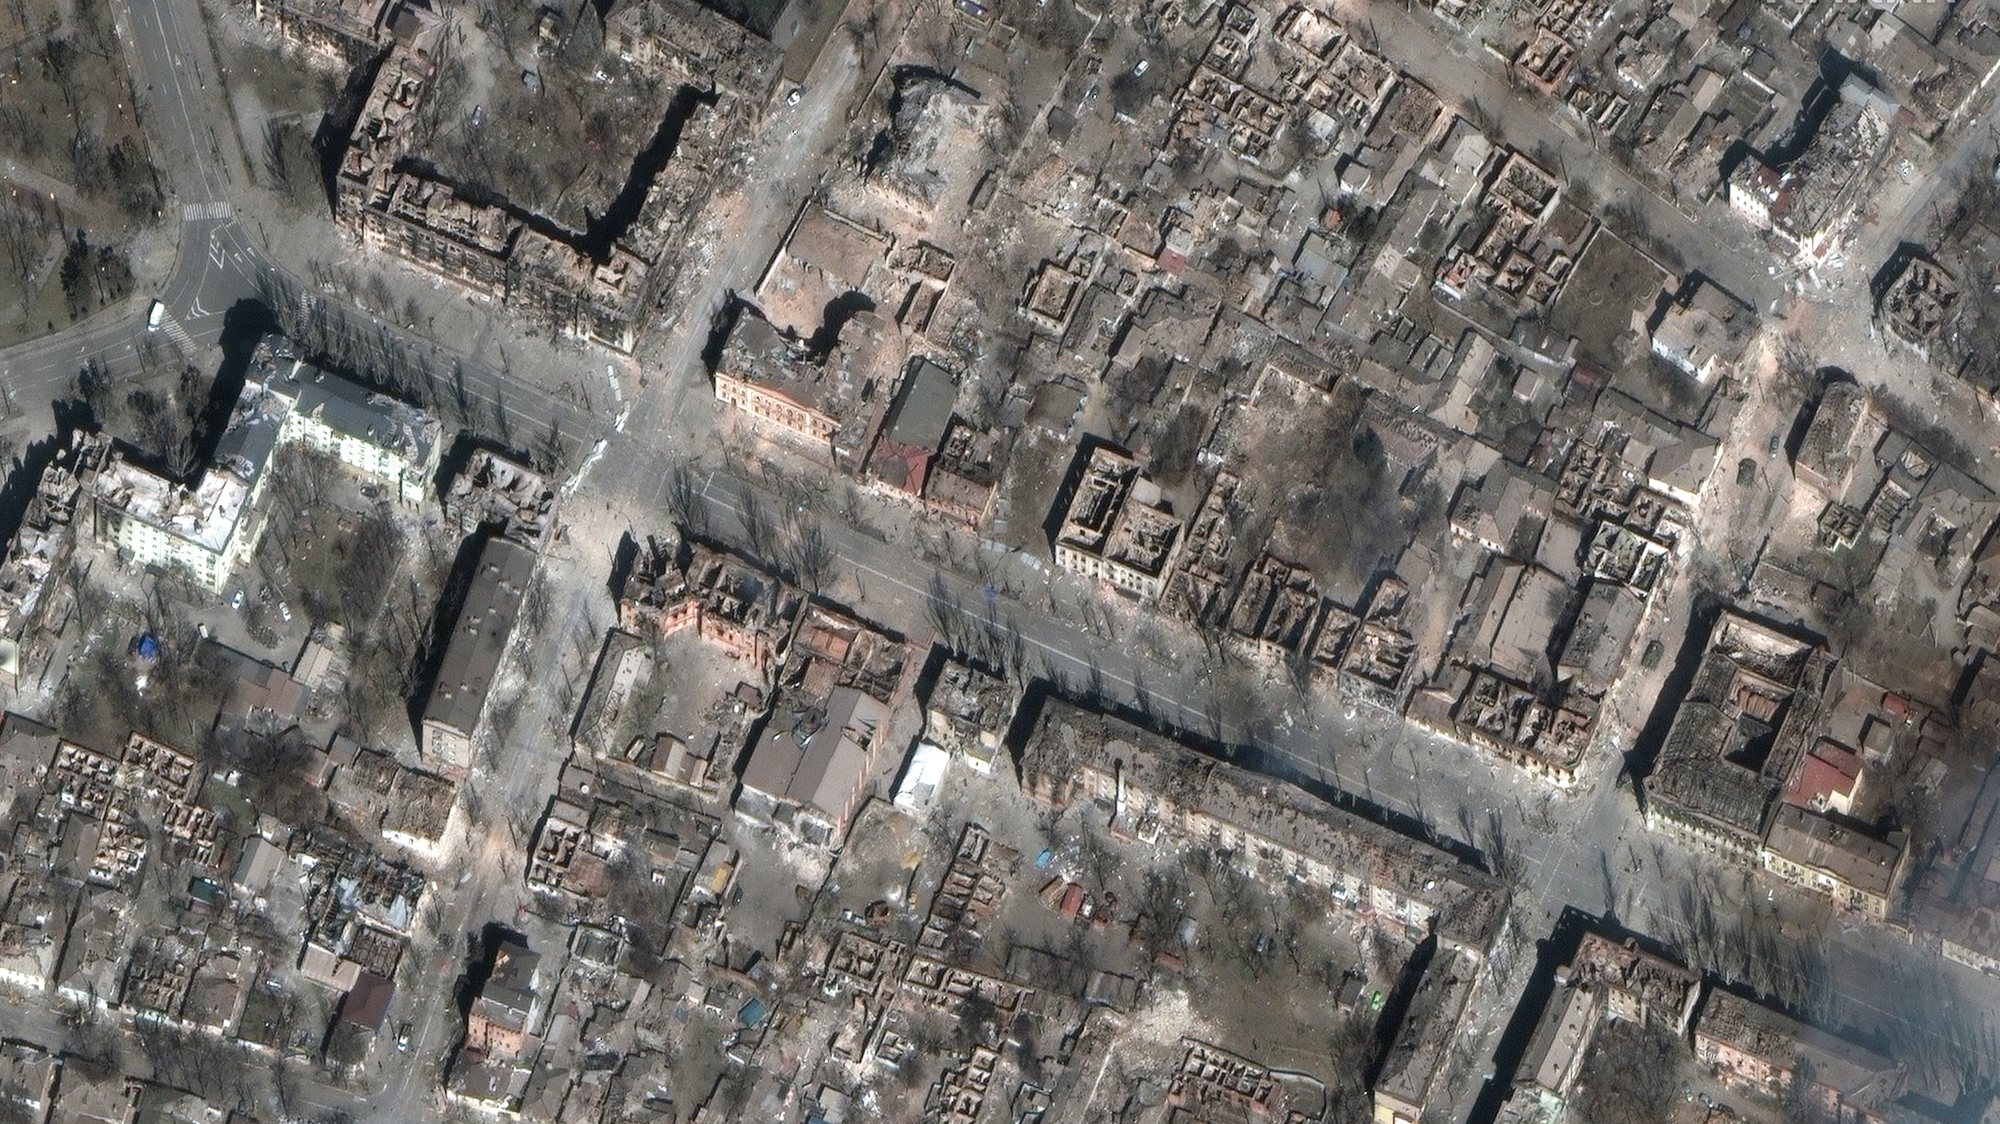 epa09859619 A handout satellite image made available by Maxar Technologies shows destruction of homes and buildings in Mariupol, Ukraine, 29 March 2022.  EPA/MAXAR TECHNOLOGIES HANDOUT -- MANDATORY CREDIT: SATELLITE IMAGE 2022 MAXAR TECHNOLOGIES -- THE WATERMARK MAY NOT BE REMOVED/CROPPED -- HANDOUT EDITORIAL USE ONLY/NO SALES